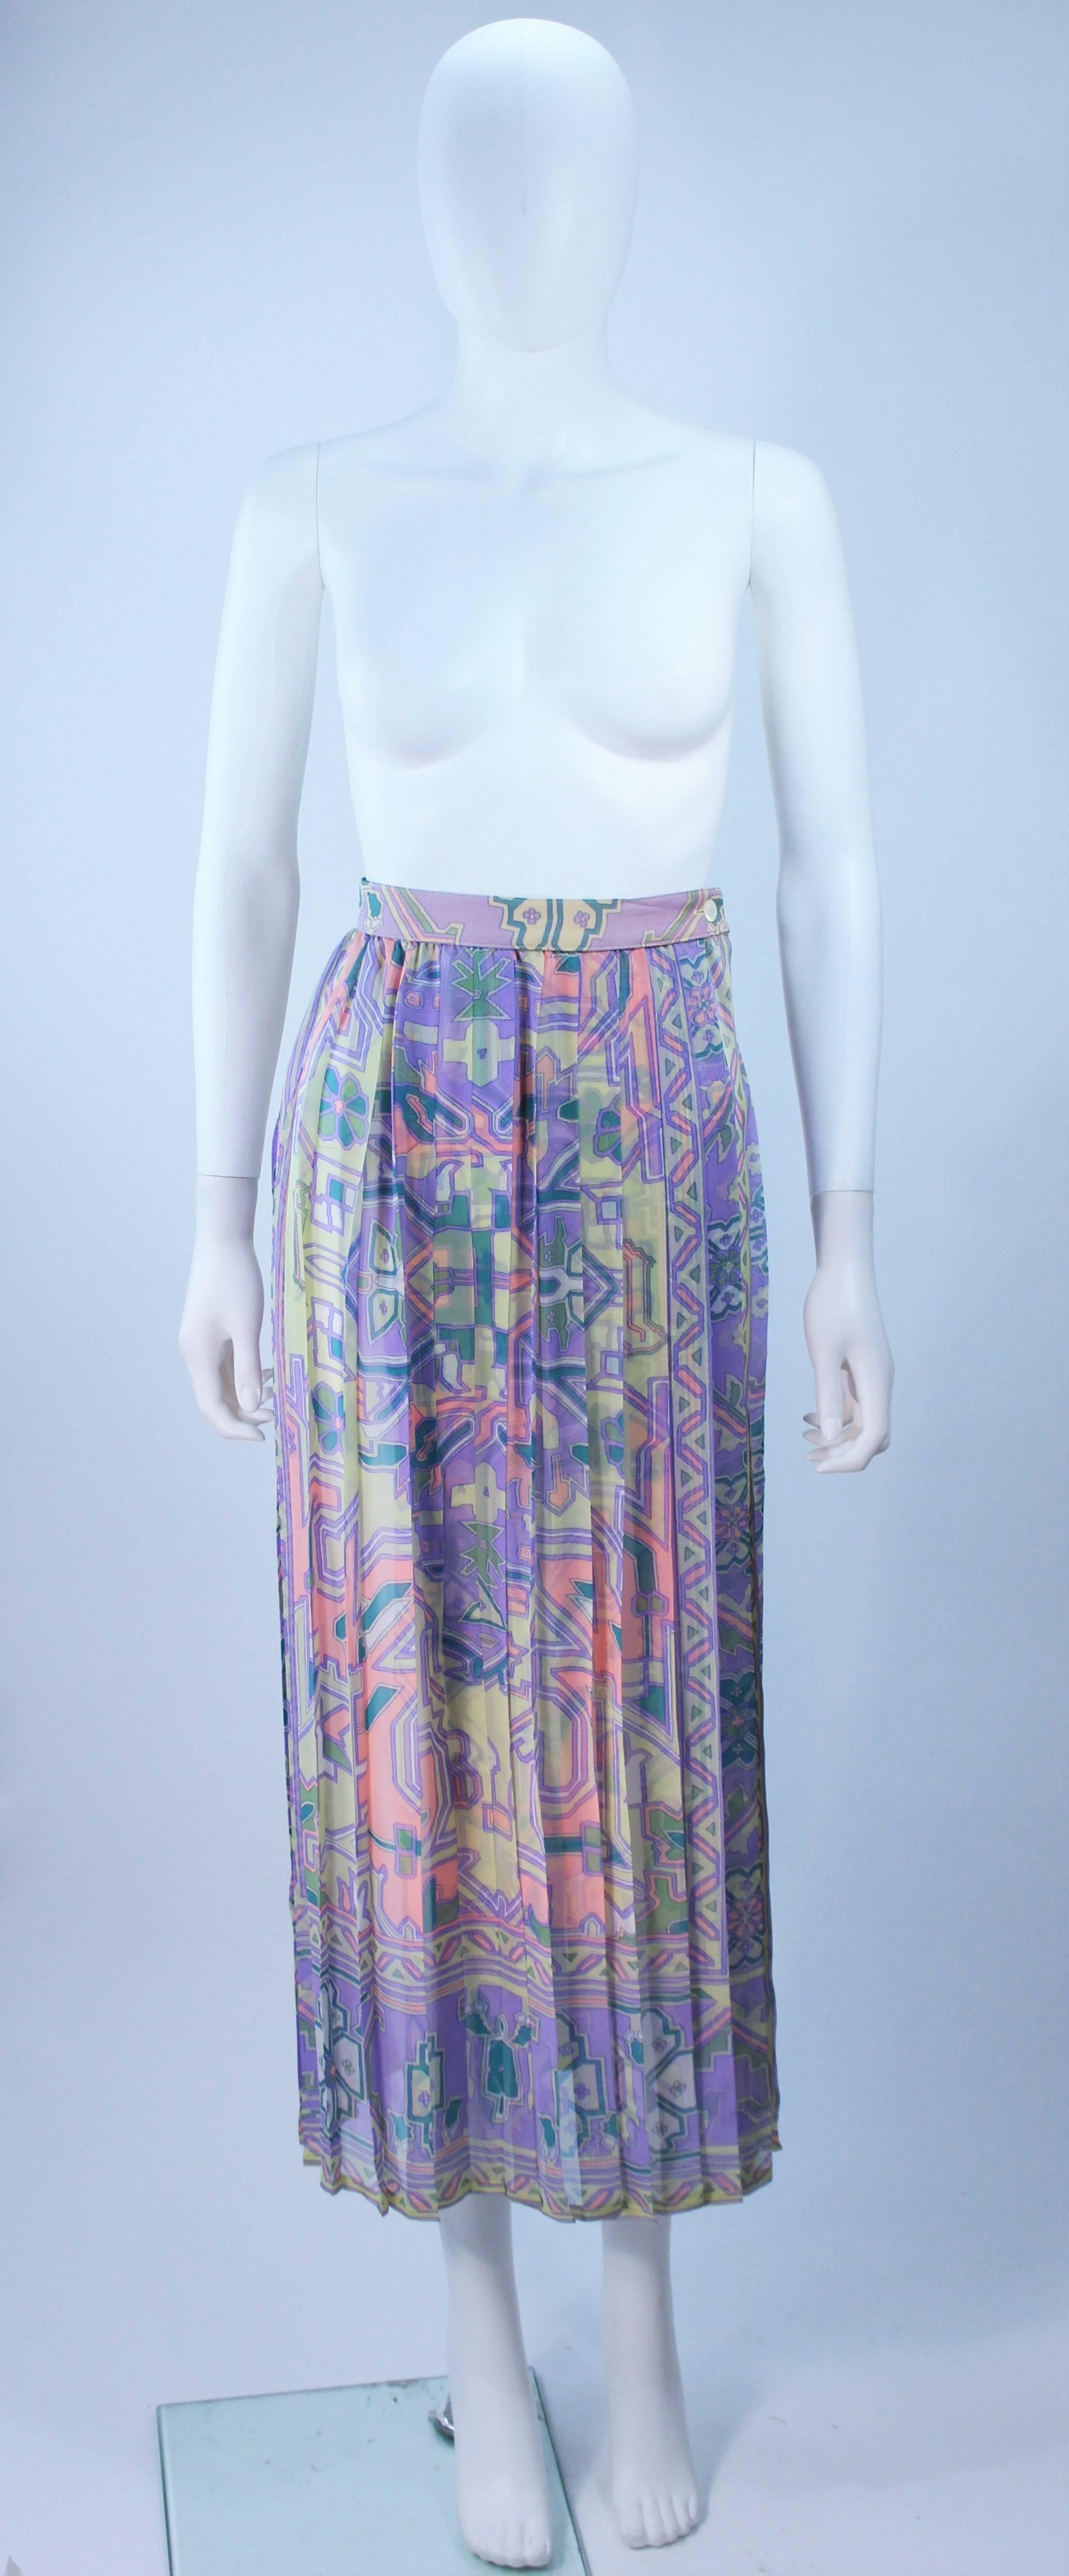  This Ungaro  skirt is composed of a sheer patterned fabric, with pleating. There is a side slit and single button closure. In great vintage condition. 

  **Please cross-reference measurements for personal accuracy. Size in description box is an